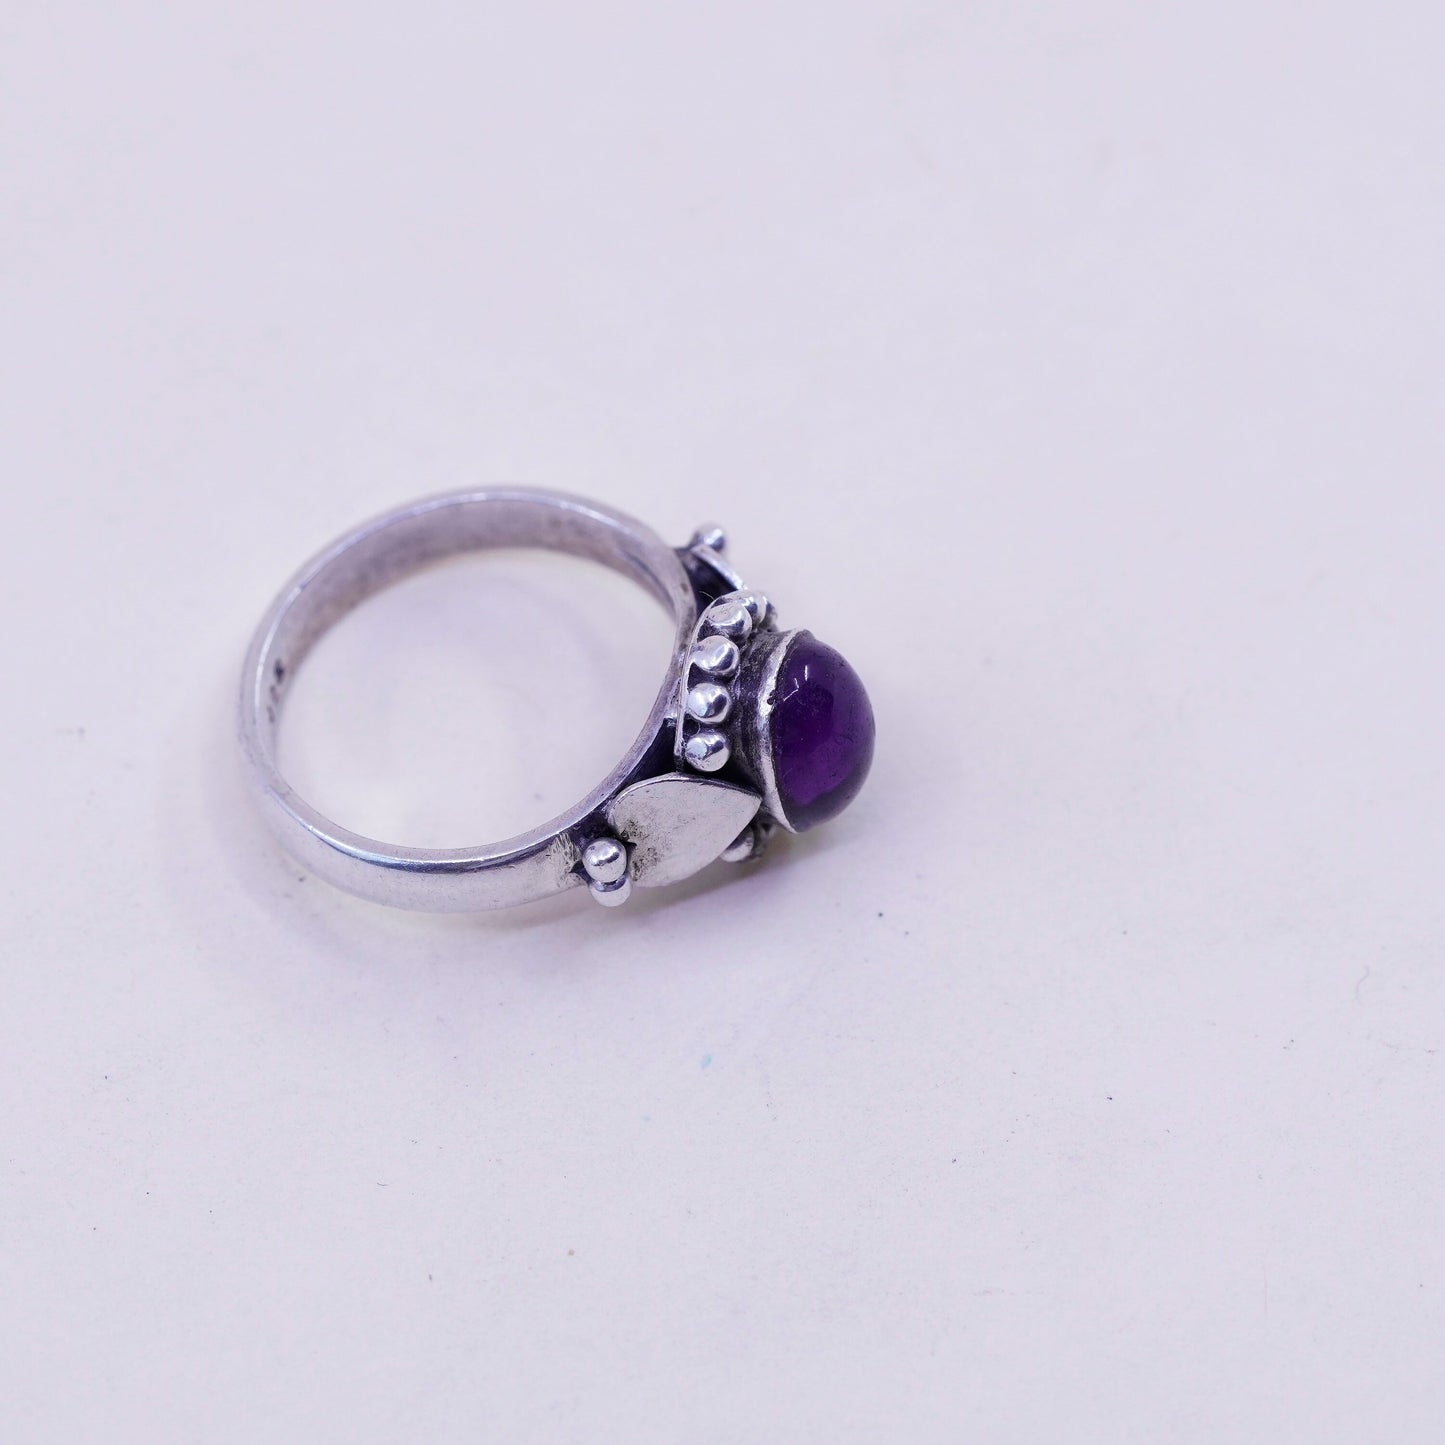 Size 7, Vintage sterling 925 silver handmade ring with amethyst, modernist